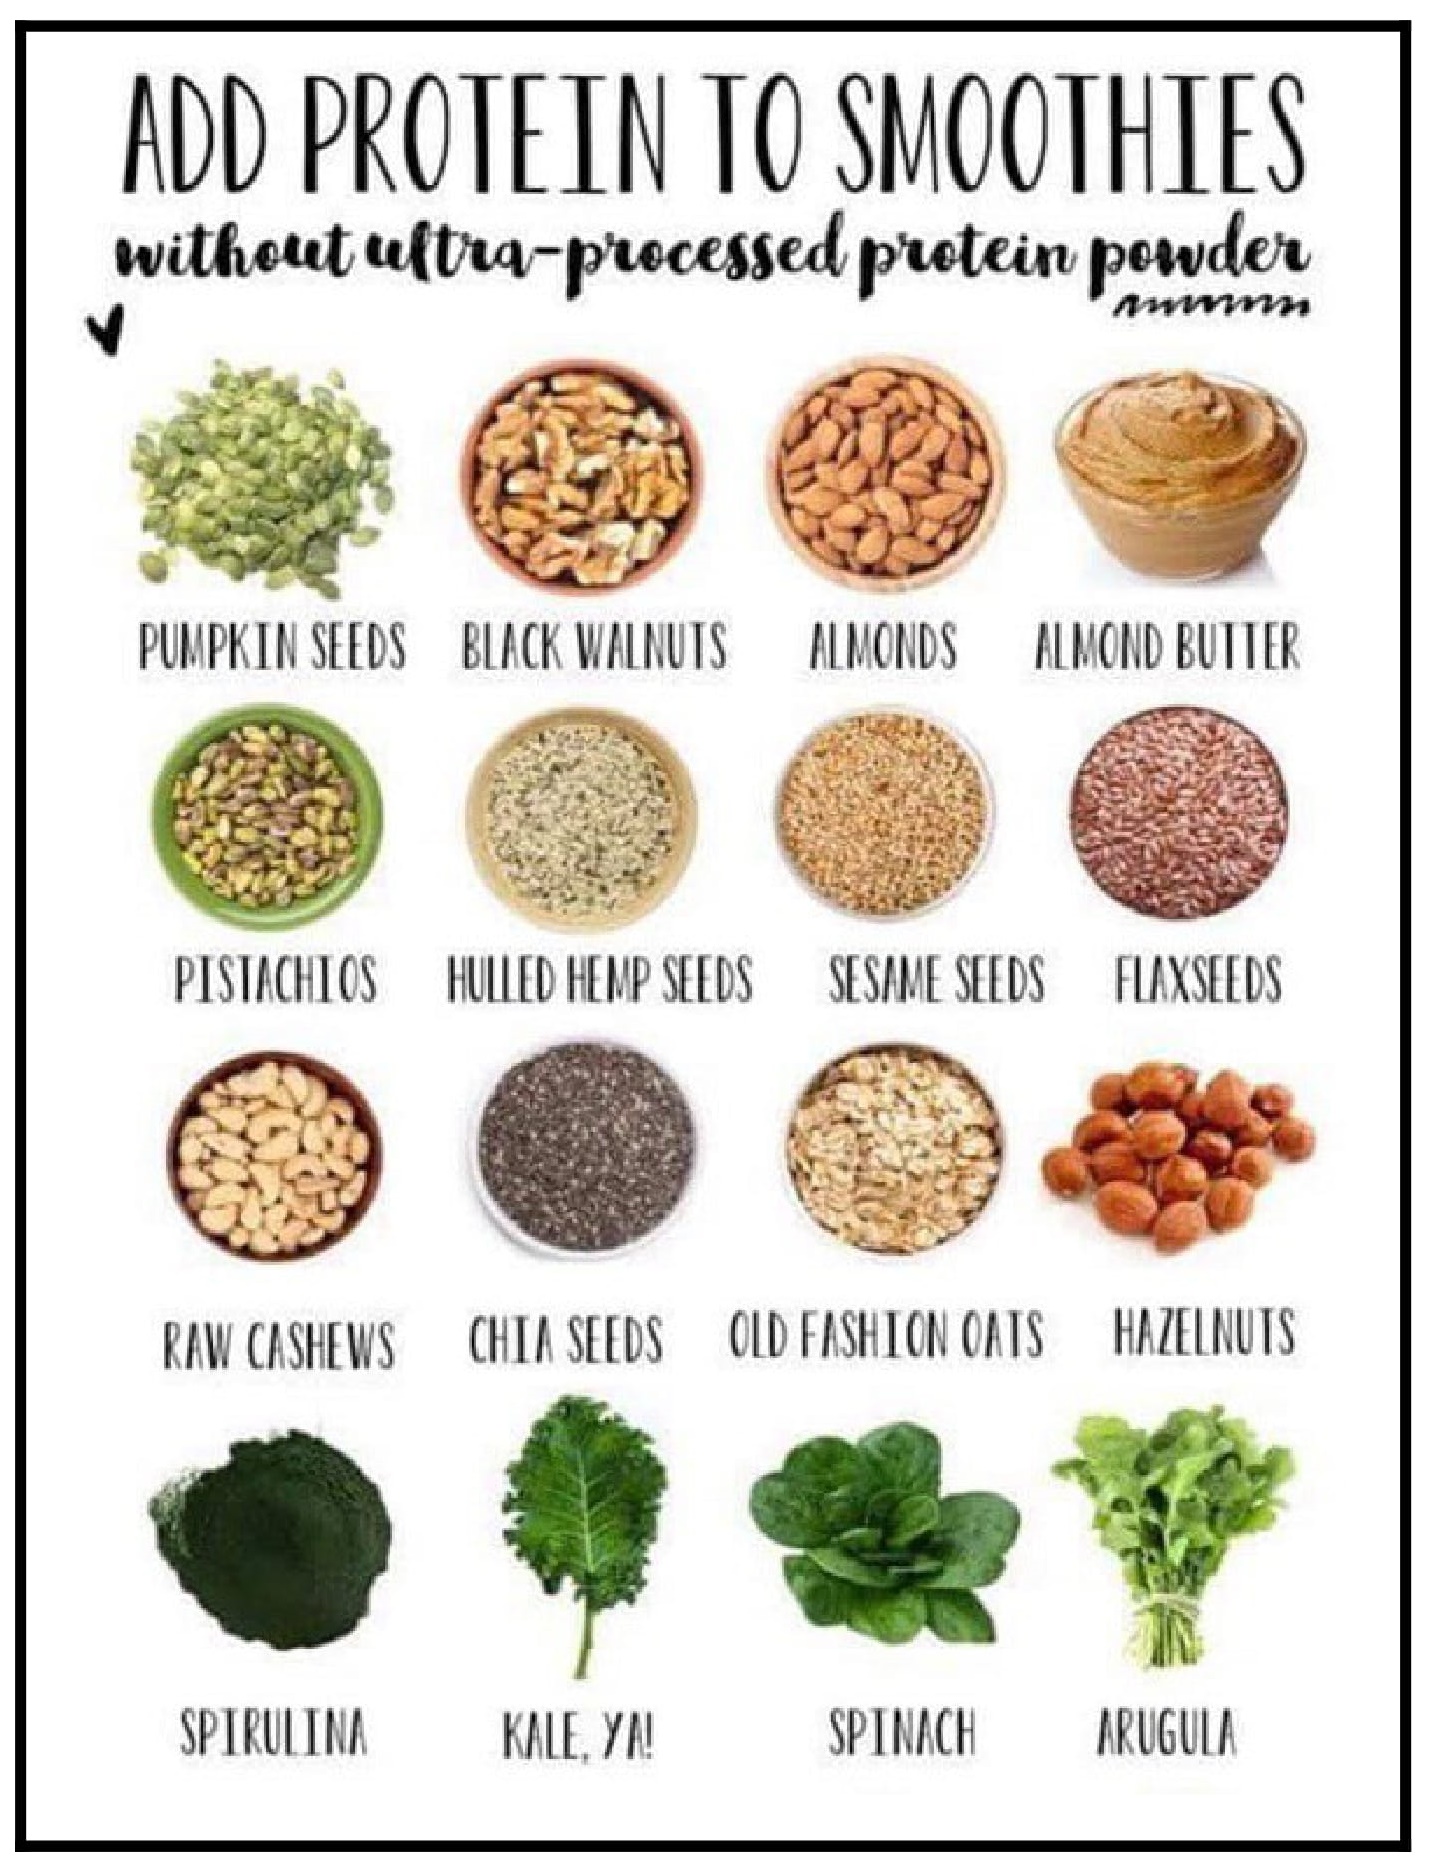 Add Protein to Smoothies